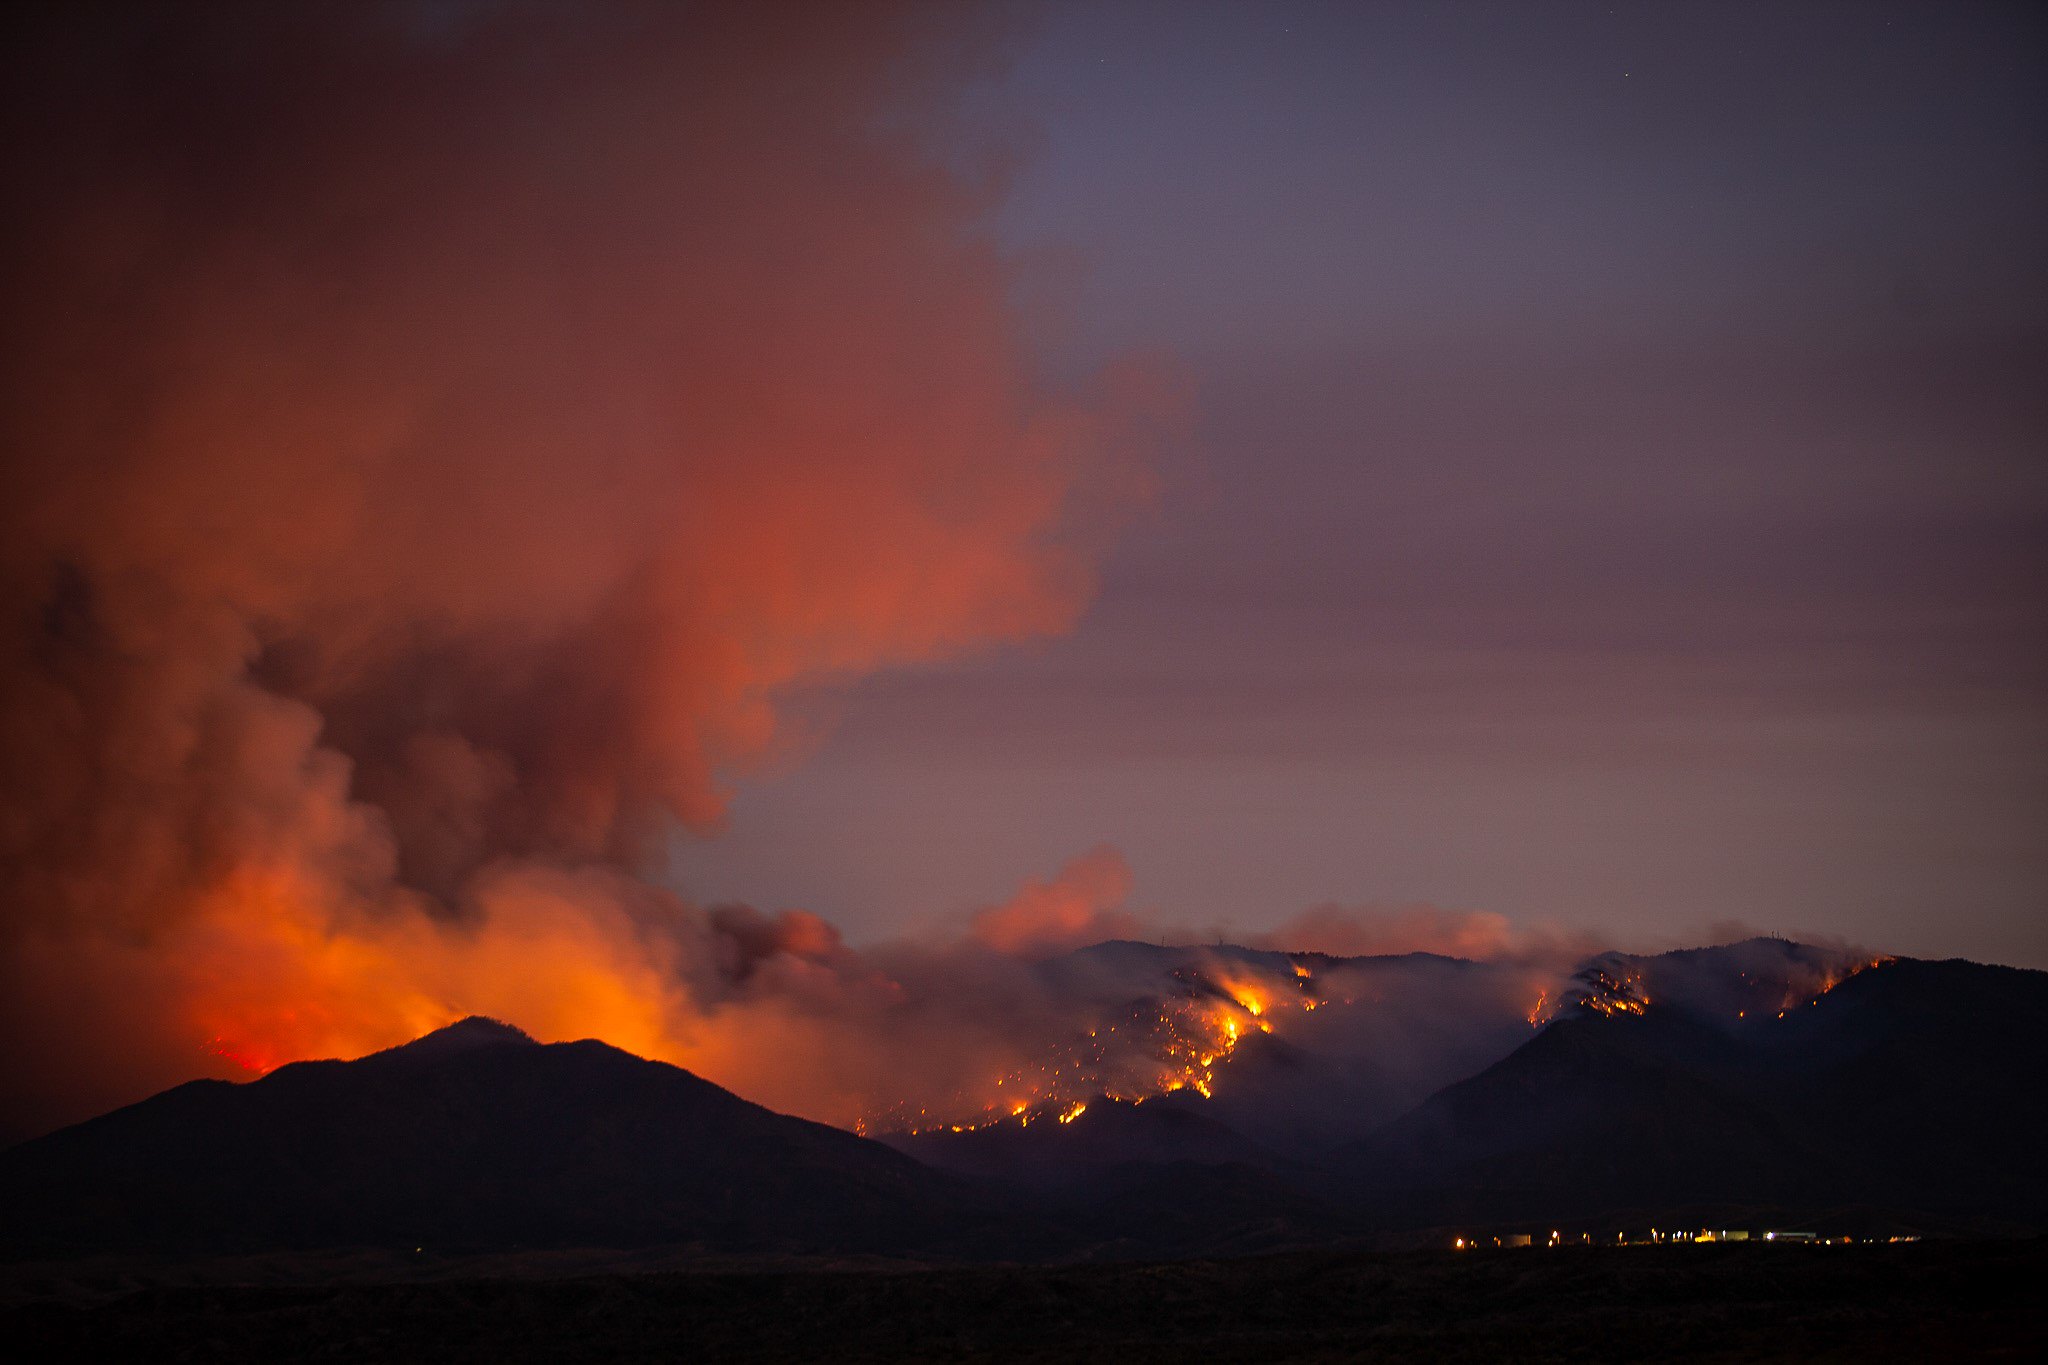 fire on mountain tops at nighttime